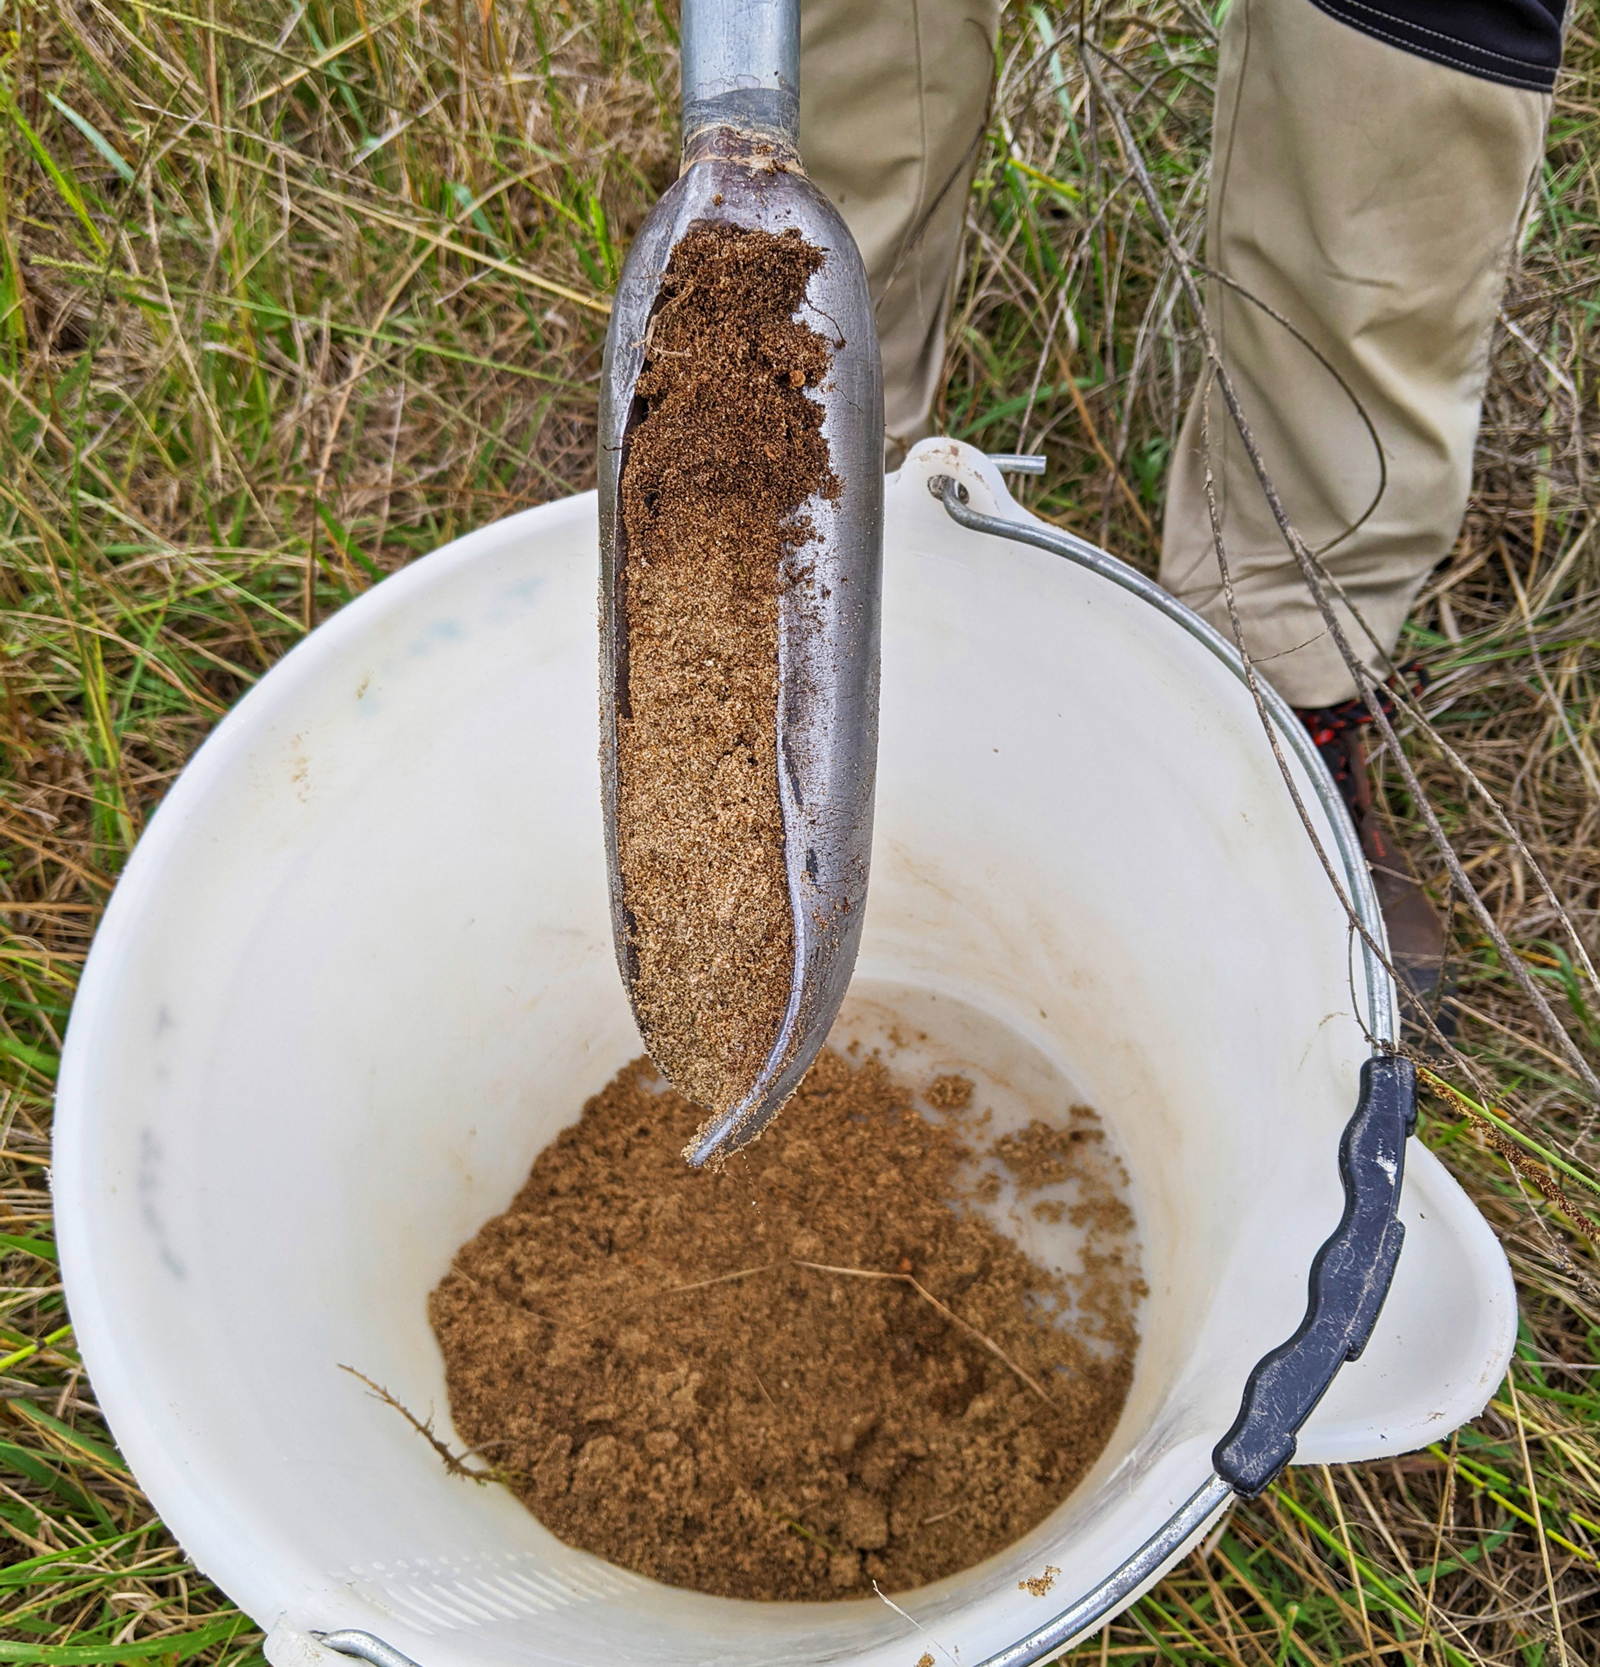  During the sampling, the difference in soil type between the upper and lower part of the sample is clearly visible. © BRGM